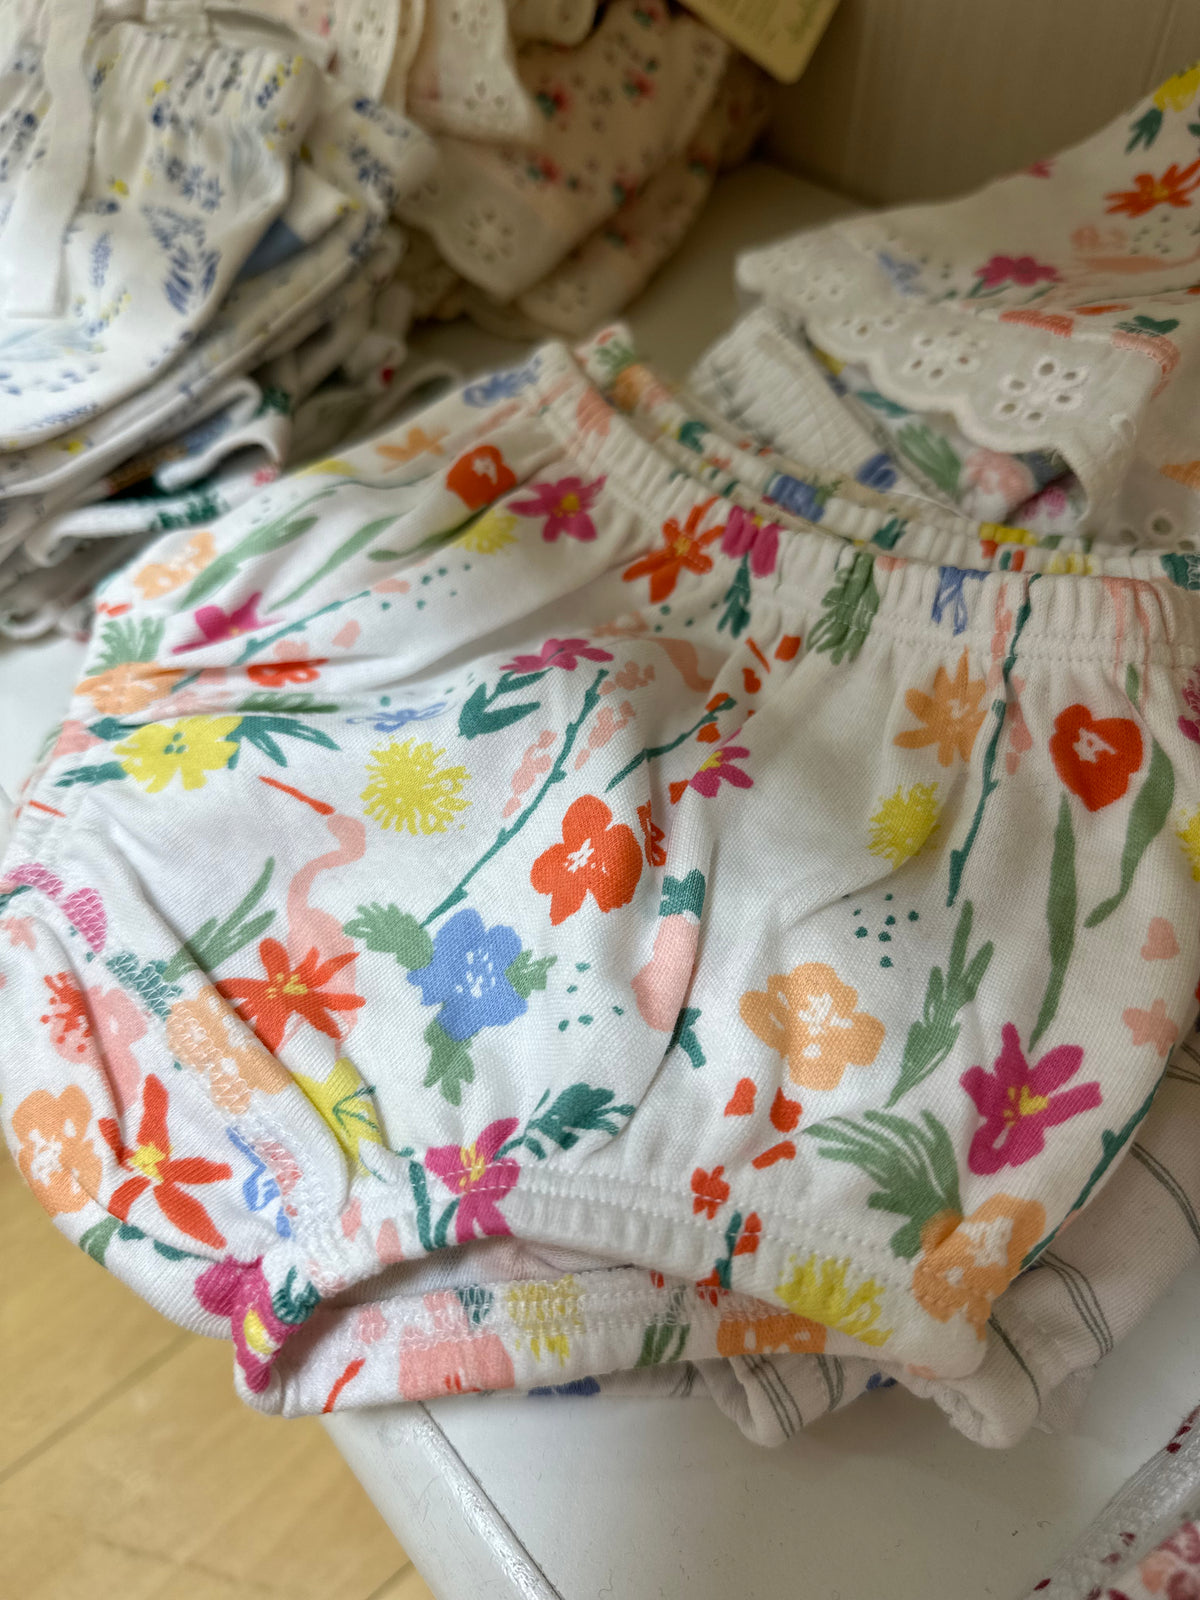 Spring Floral Diaper Cover